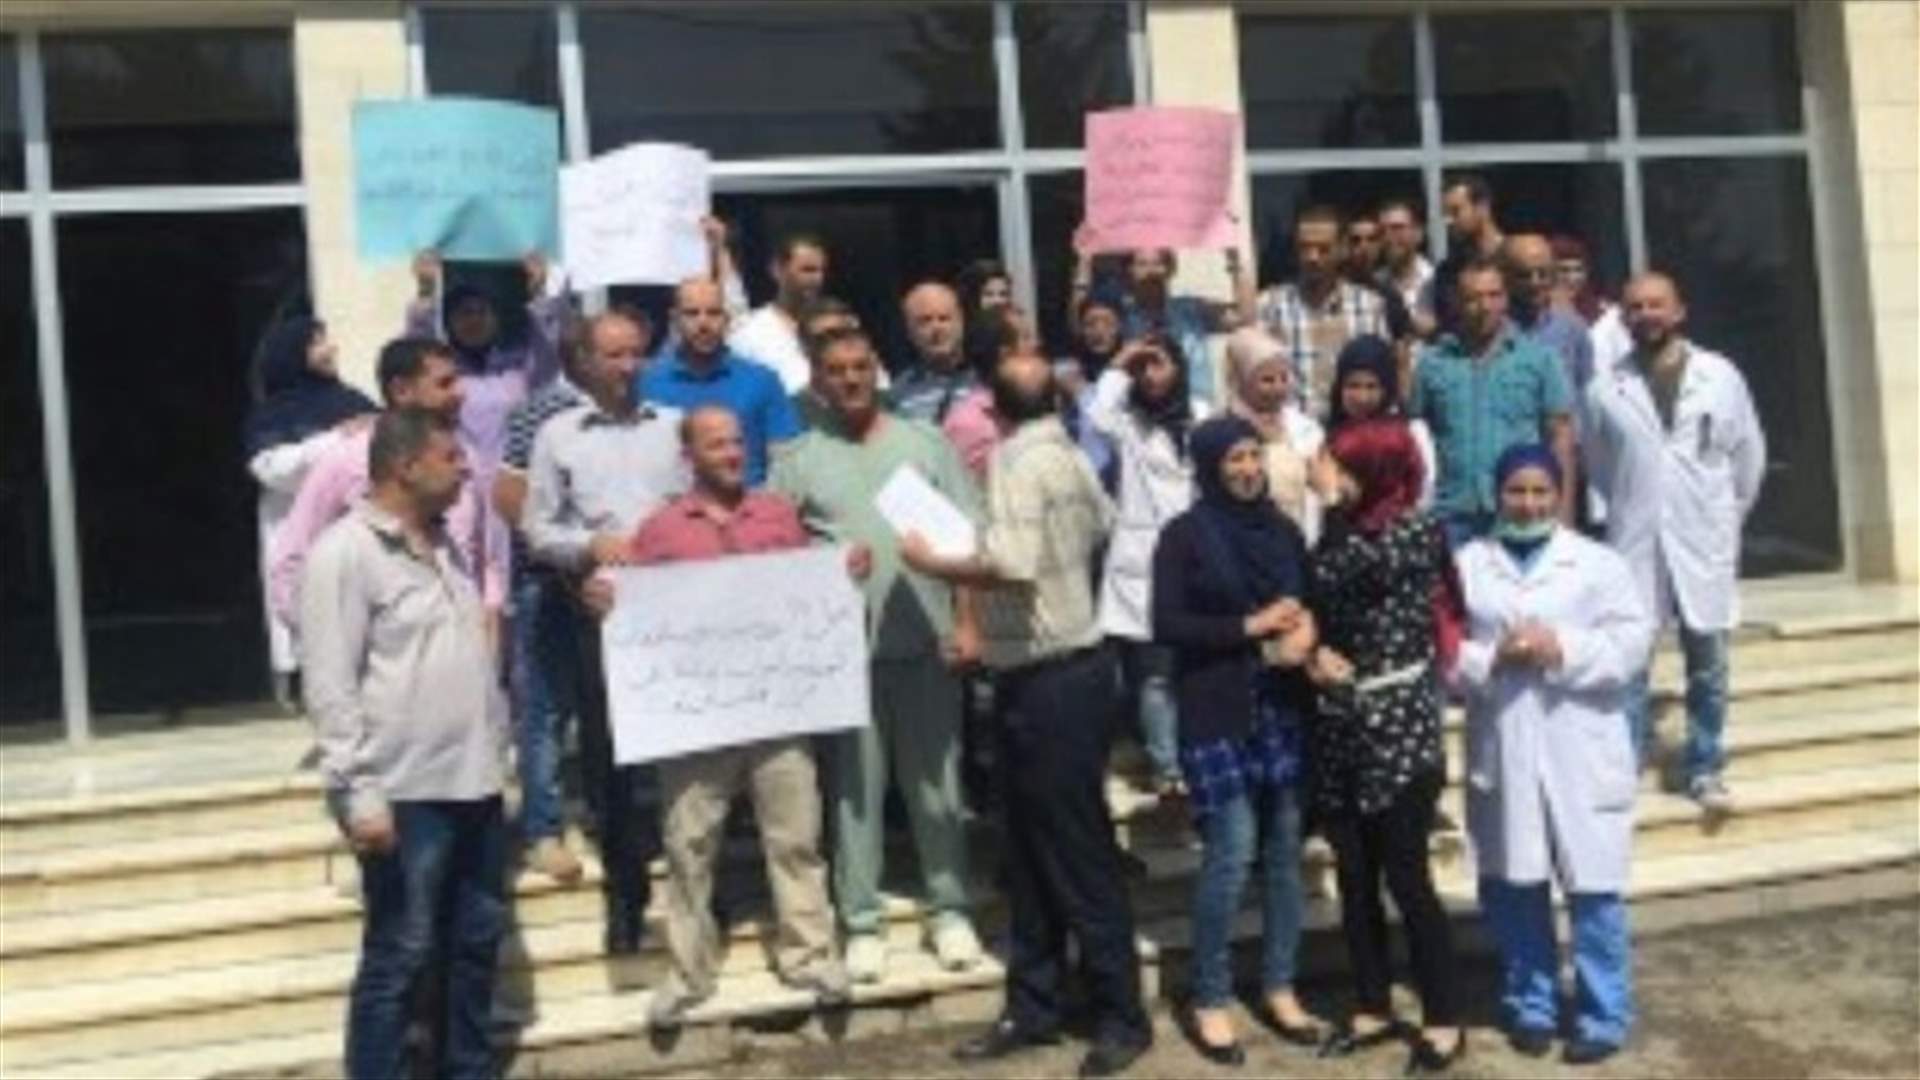 Staff of Baalbek Governmental Hospital stage sit-in 